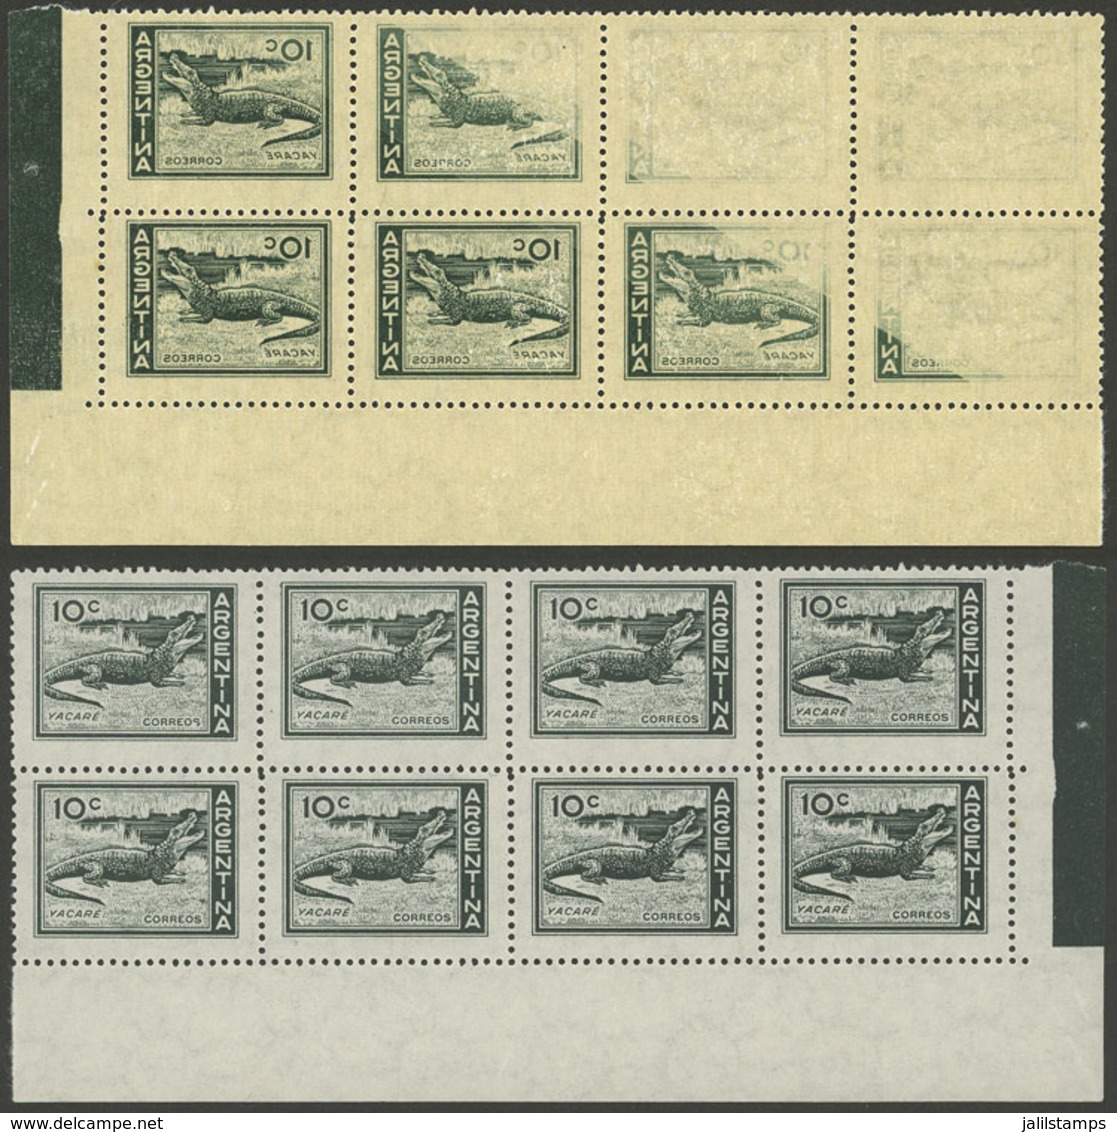 ARGENTINA: GJ.1123CA, 10c. Yacare Caiman, Block Of 8 With OFFSET IMPRESSION ON BACK, Excellent! - Ungebraucht